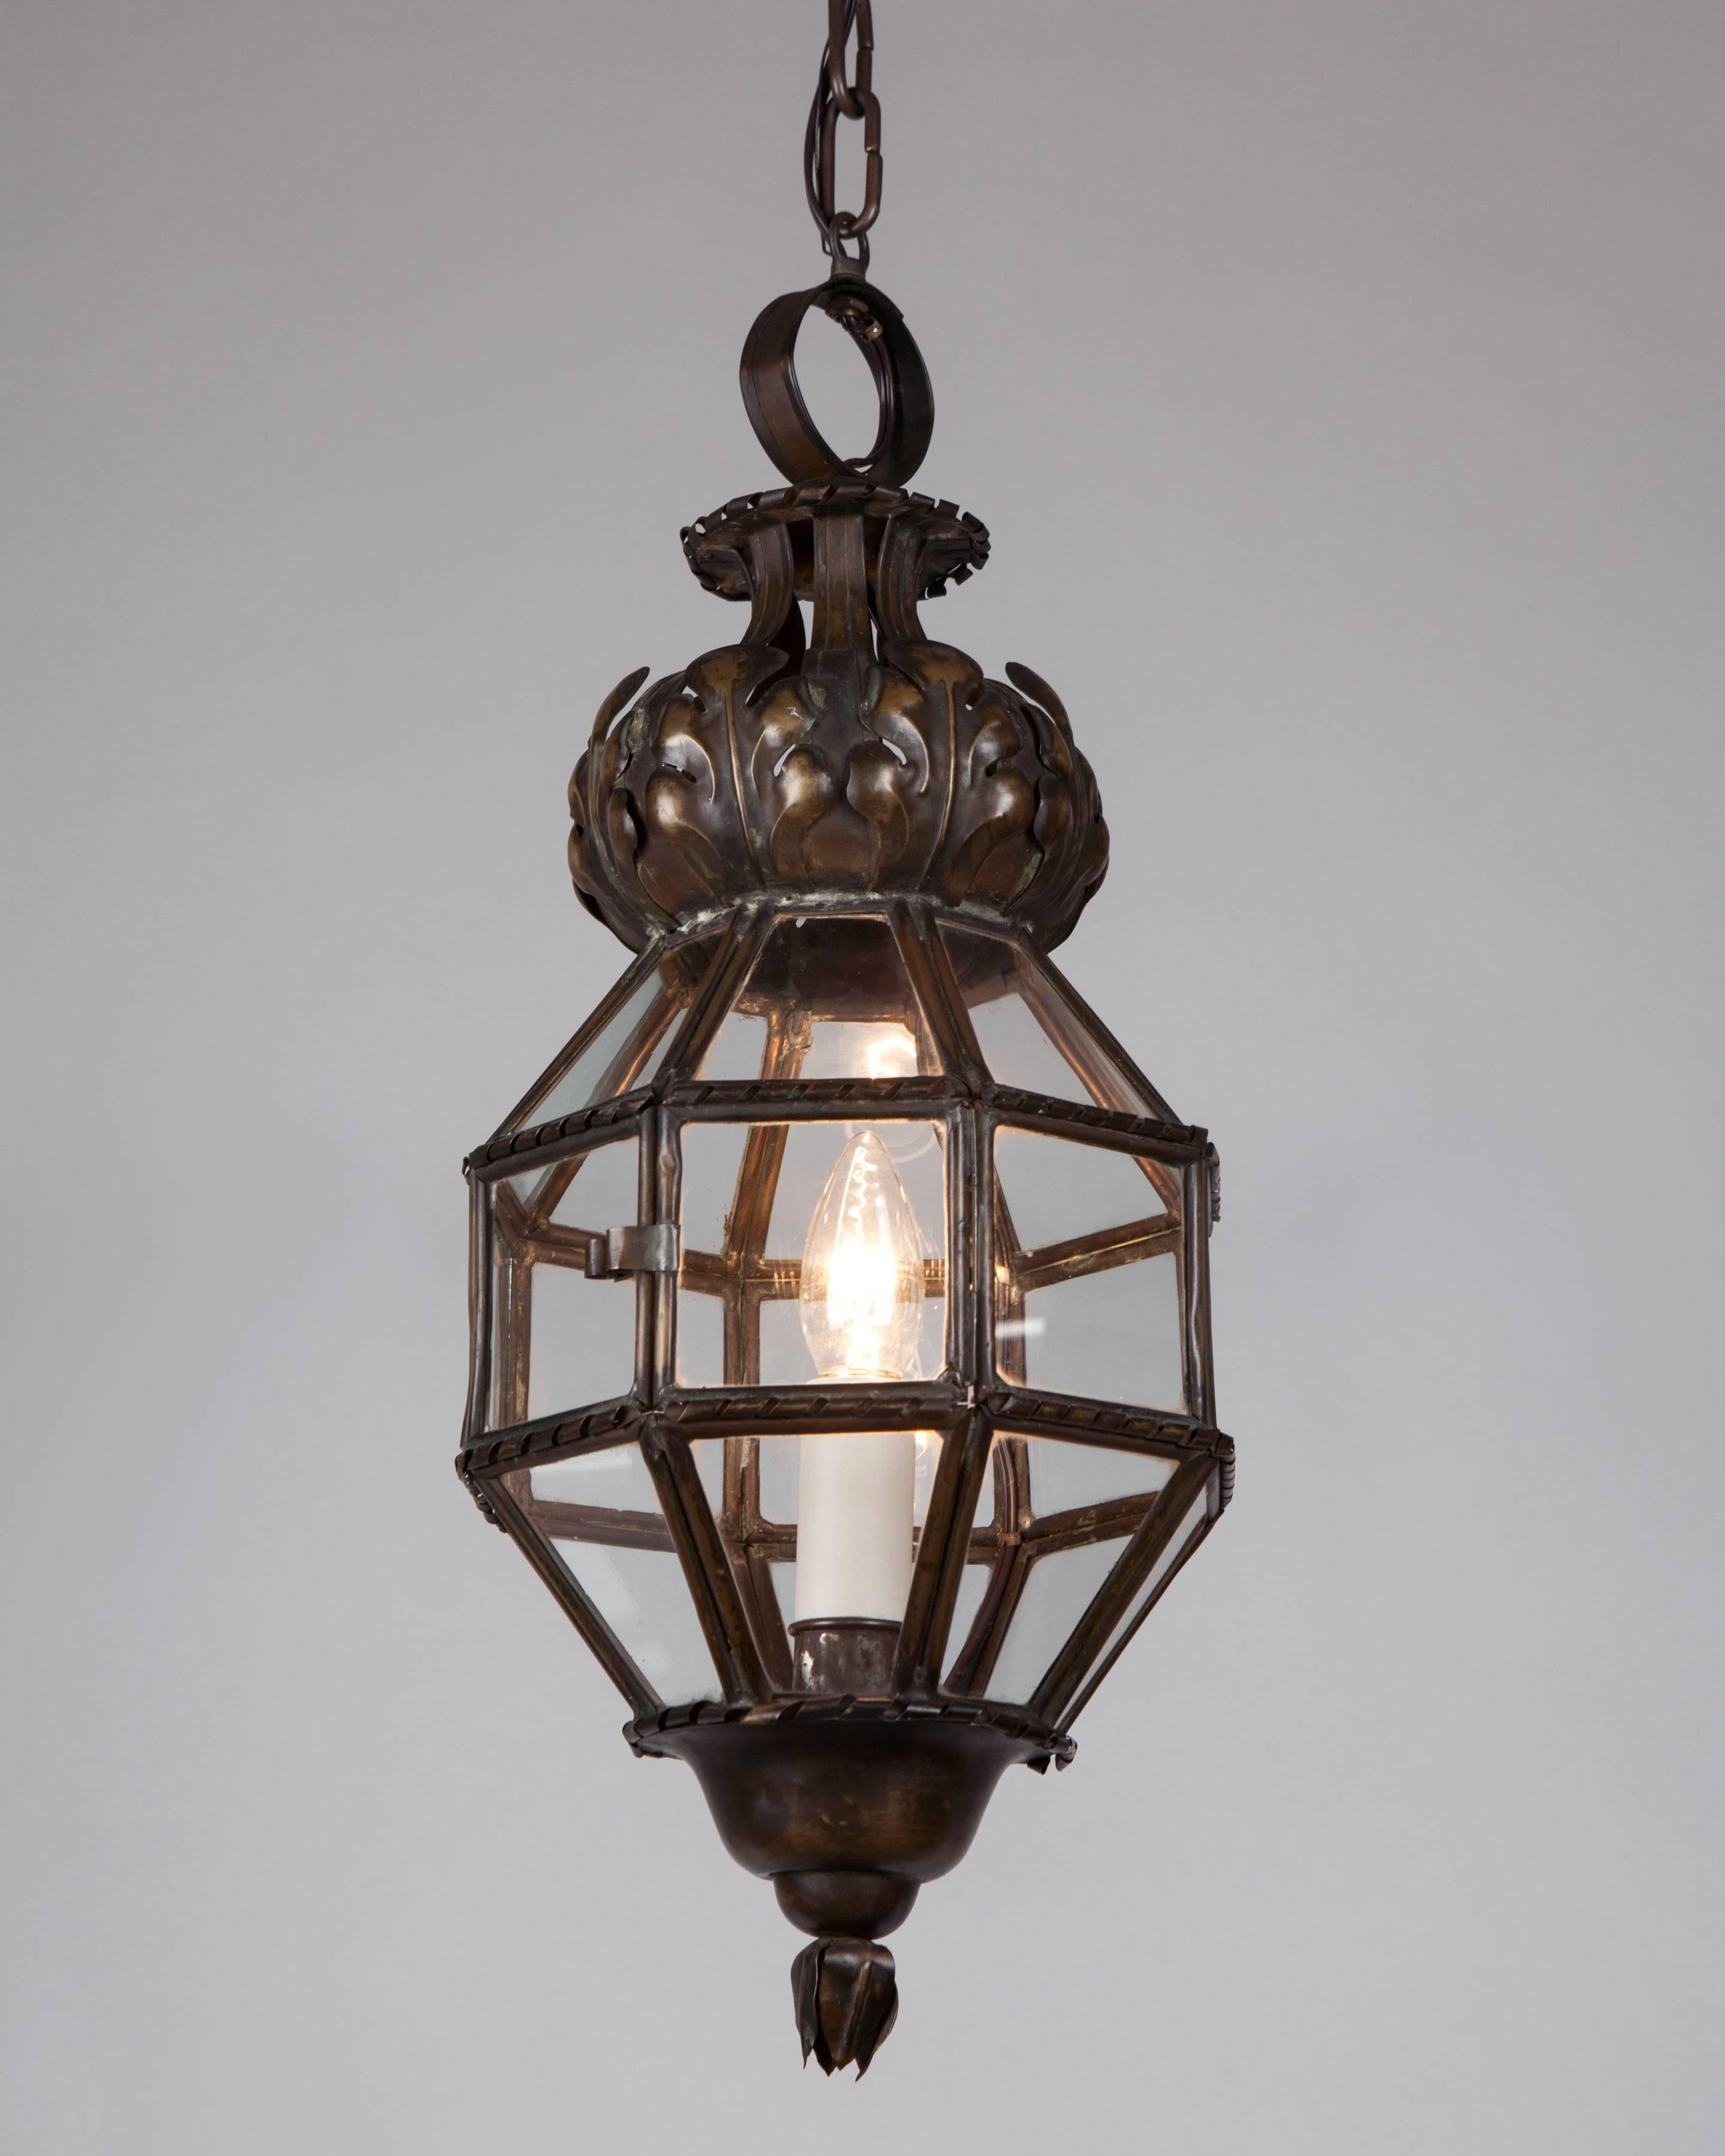 AHL4090
A 24-sided antique lantern with delicate brass framing, repousse leaves, and scrolls, in its original aged brass and bronze patina. Glazed with clear glass panels. Due to the antique nature of this fixture, there may be some nicks or